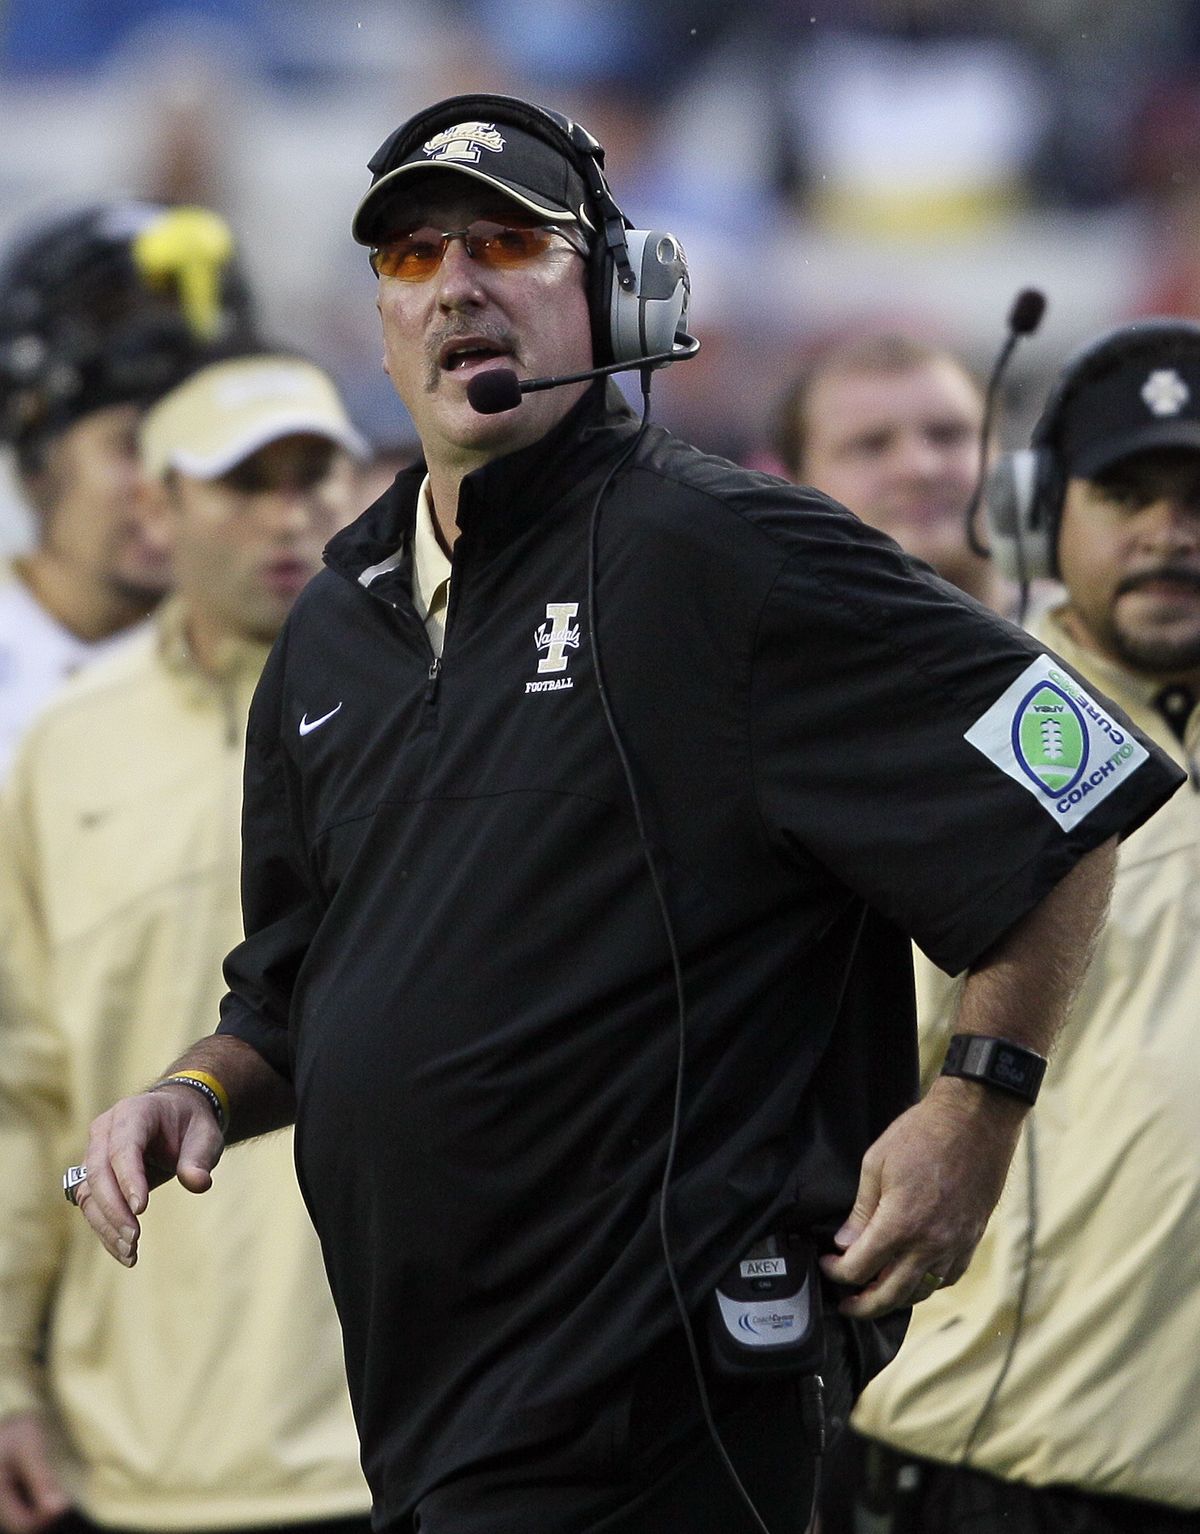 Idaho Vandals football coach Robb Akey leaves the program with a record of 20-50, including 1-7 this season. (Associated Press)